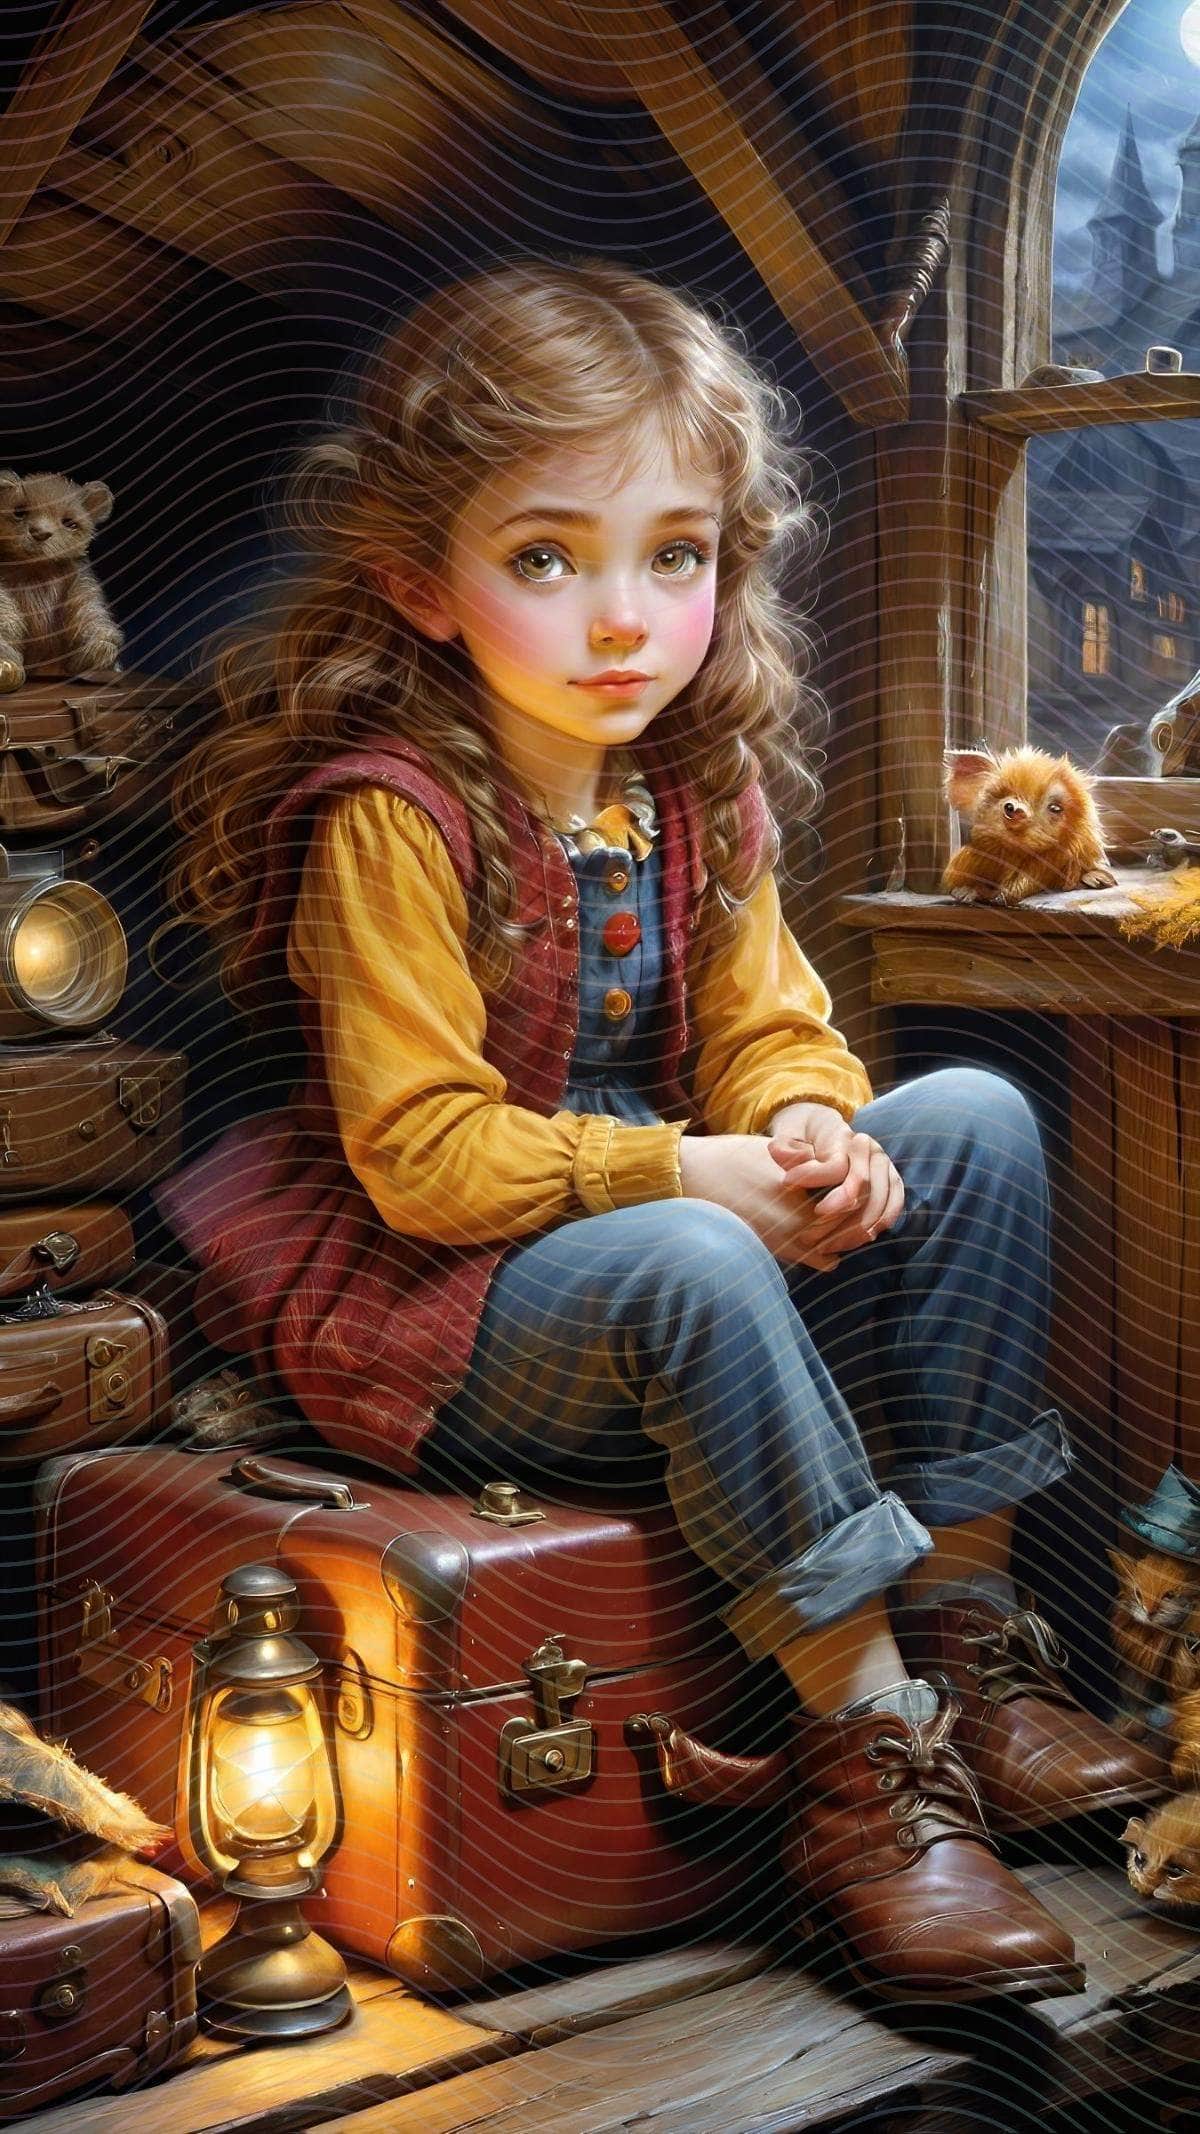 A Girl on an Old Suitcase in an Attic